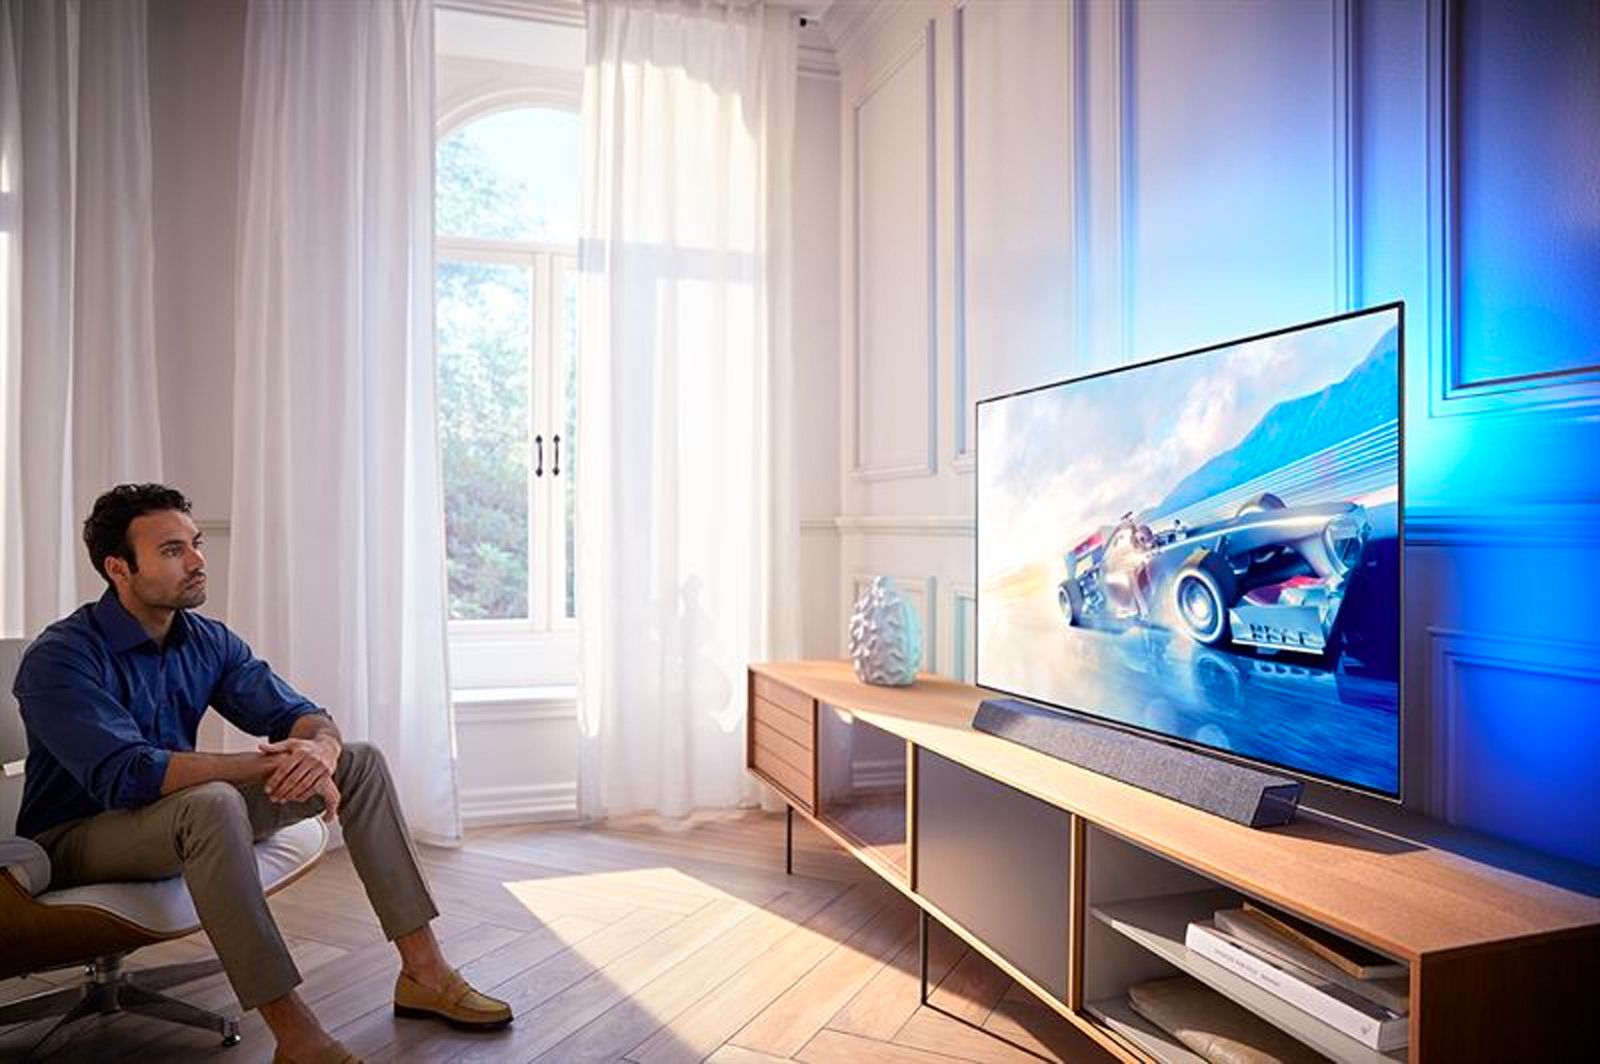 Philips reveals tow new OLED TVs with third-generation P5 picture processor image 1